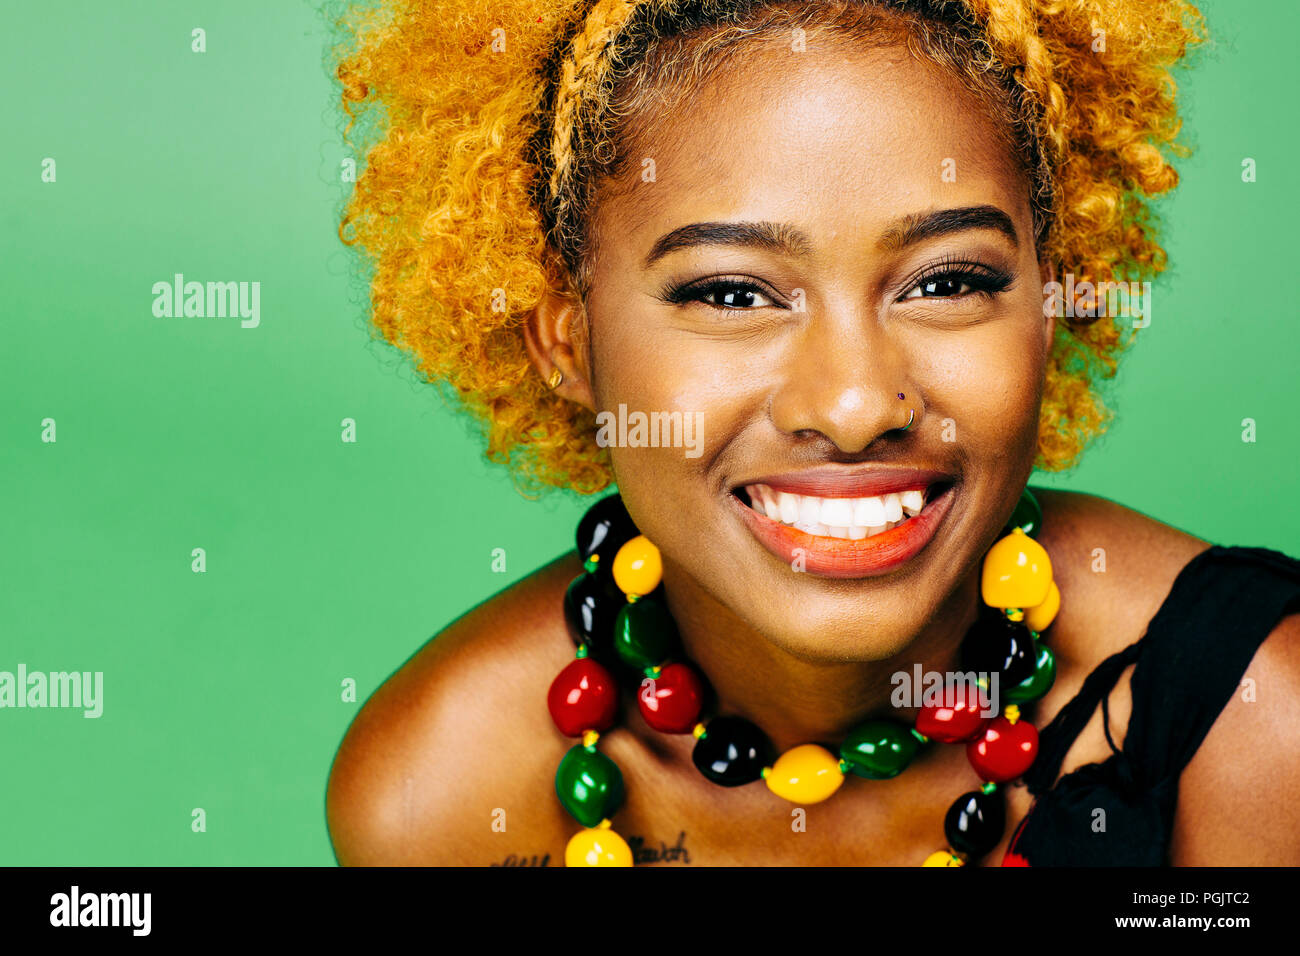 Close up of a very happy young girl with big smile and colorful necklace, in front of a green background Stock Photo